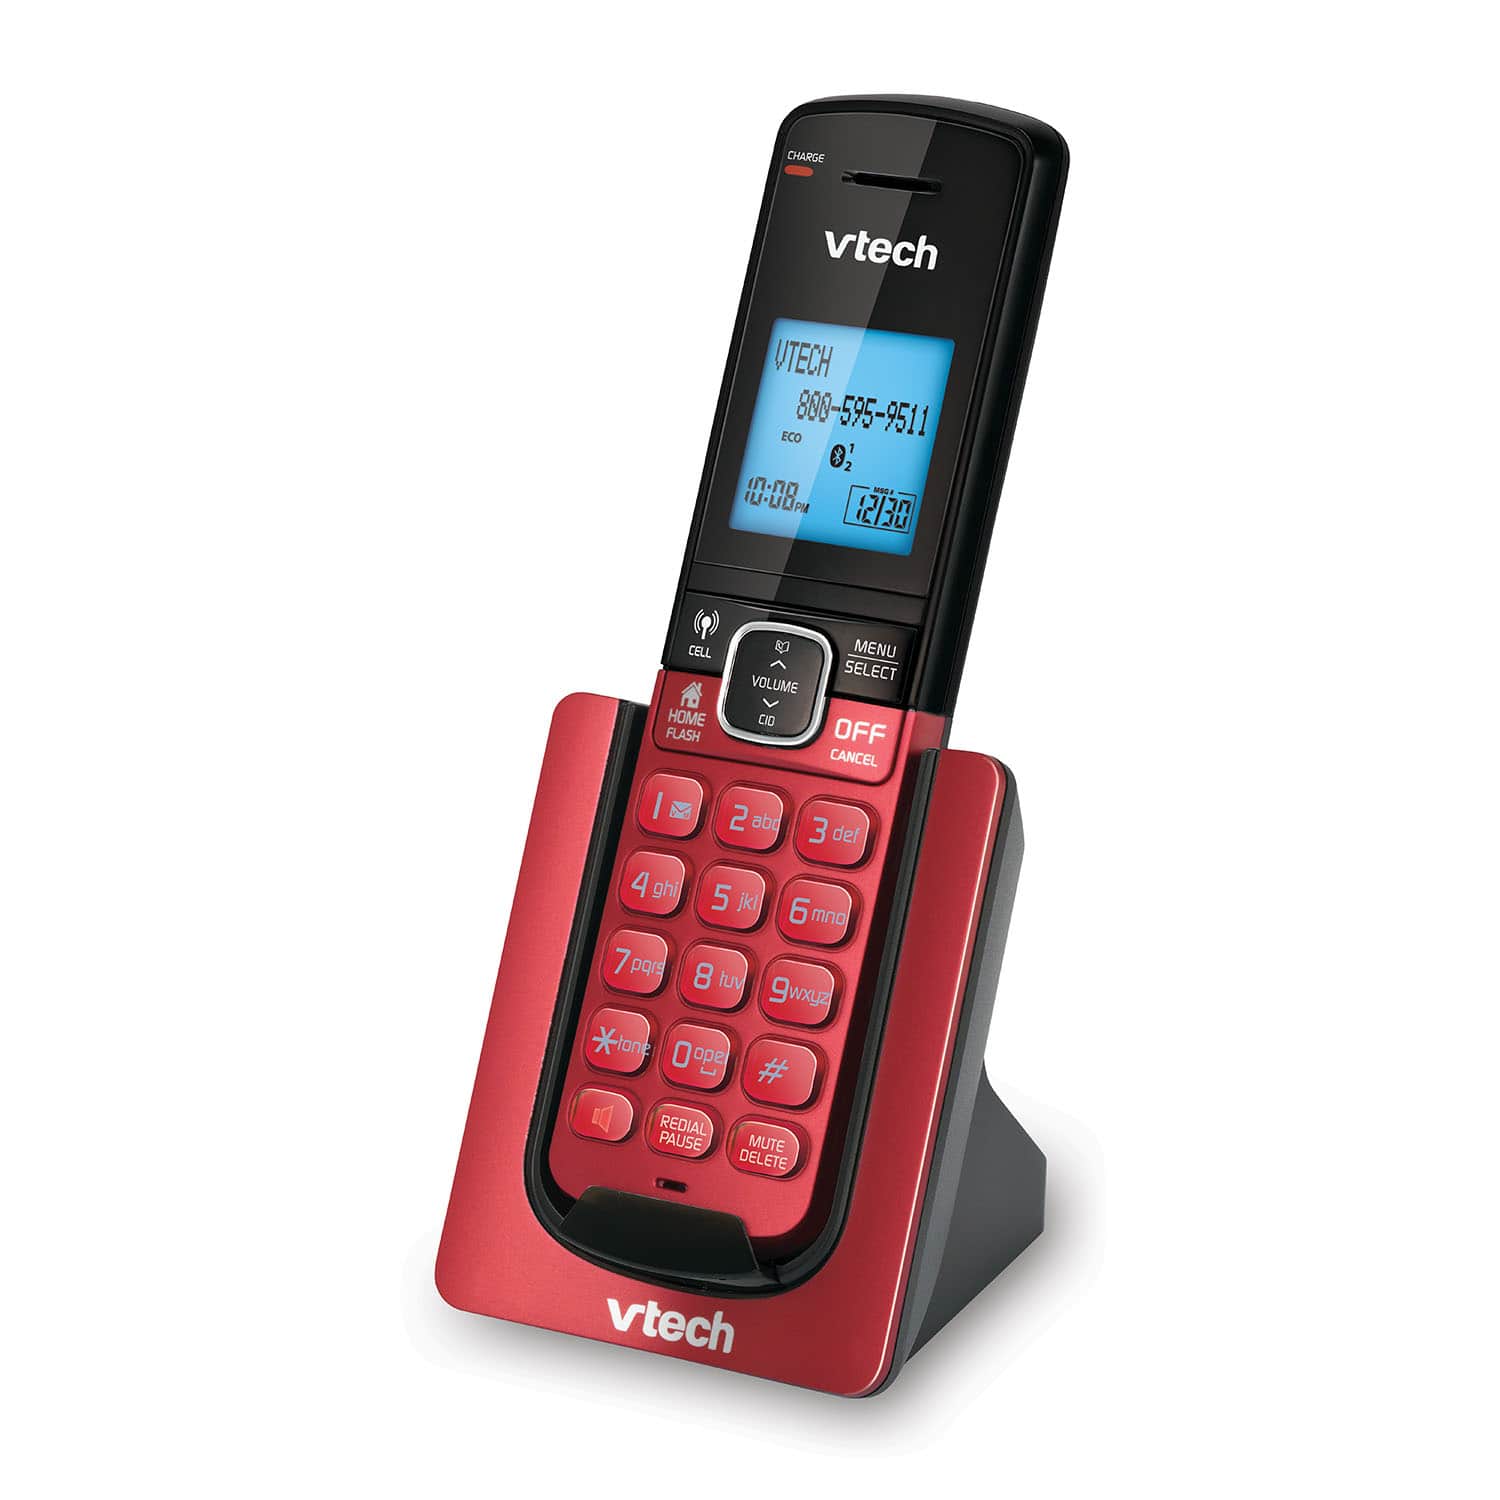 Accessory Handset with Caller ID/Call Waiting